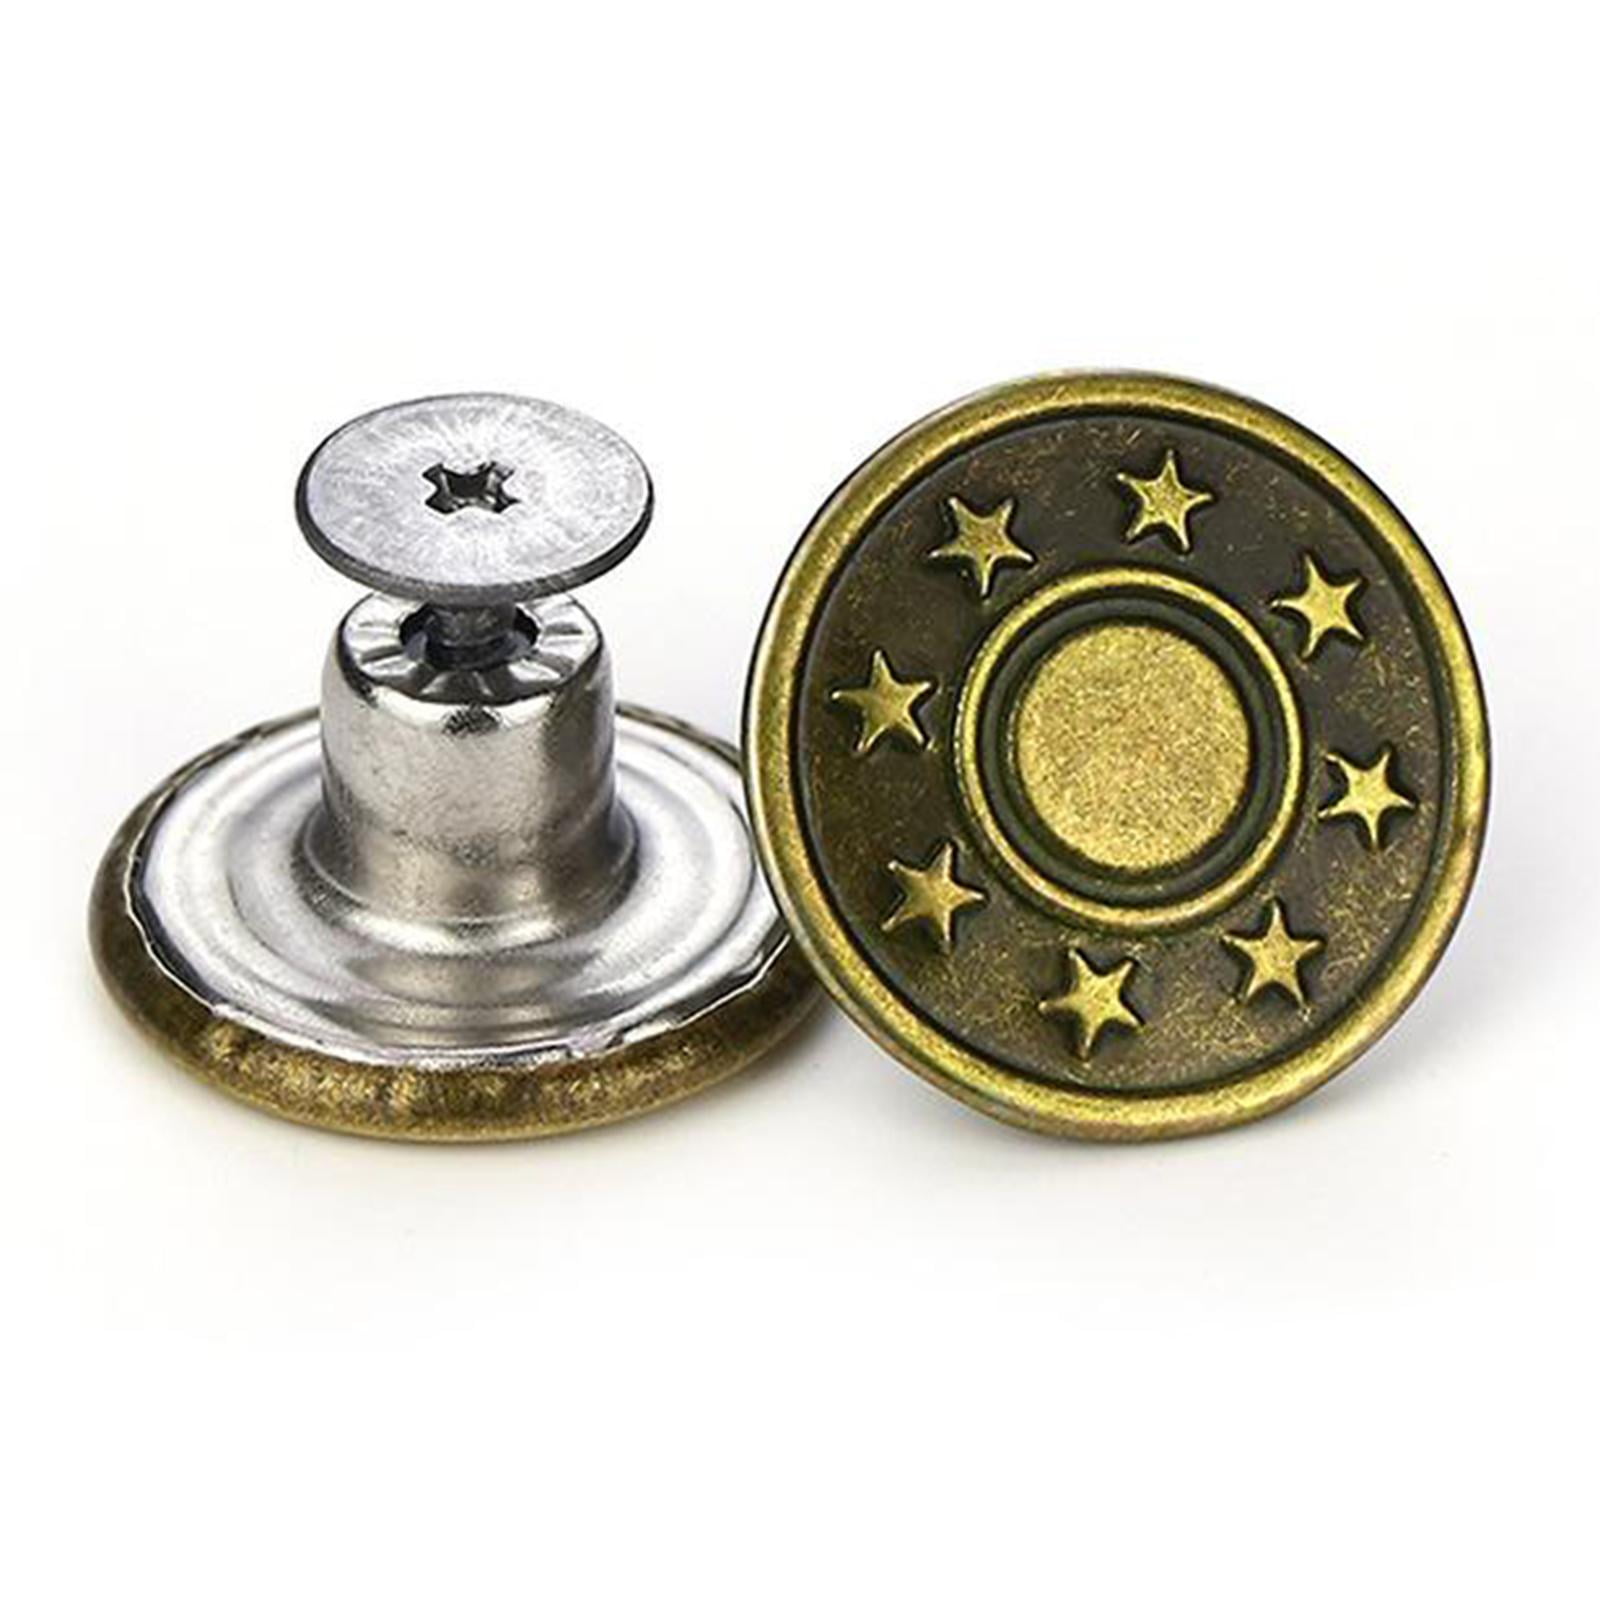 17 mm 20mm Jeans Buttons install Mold DIY accessories Jeans button tools  Metal eyelets molds dies - Price history & Review, AliExpress Seller -  DoonLoo Official Store